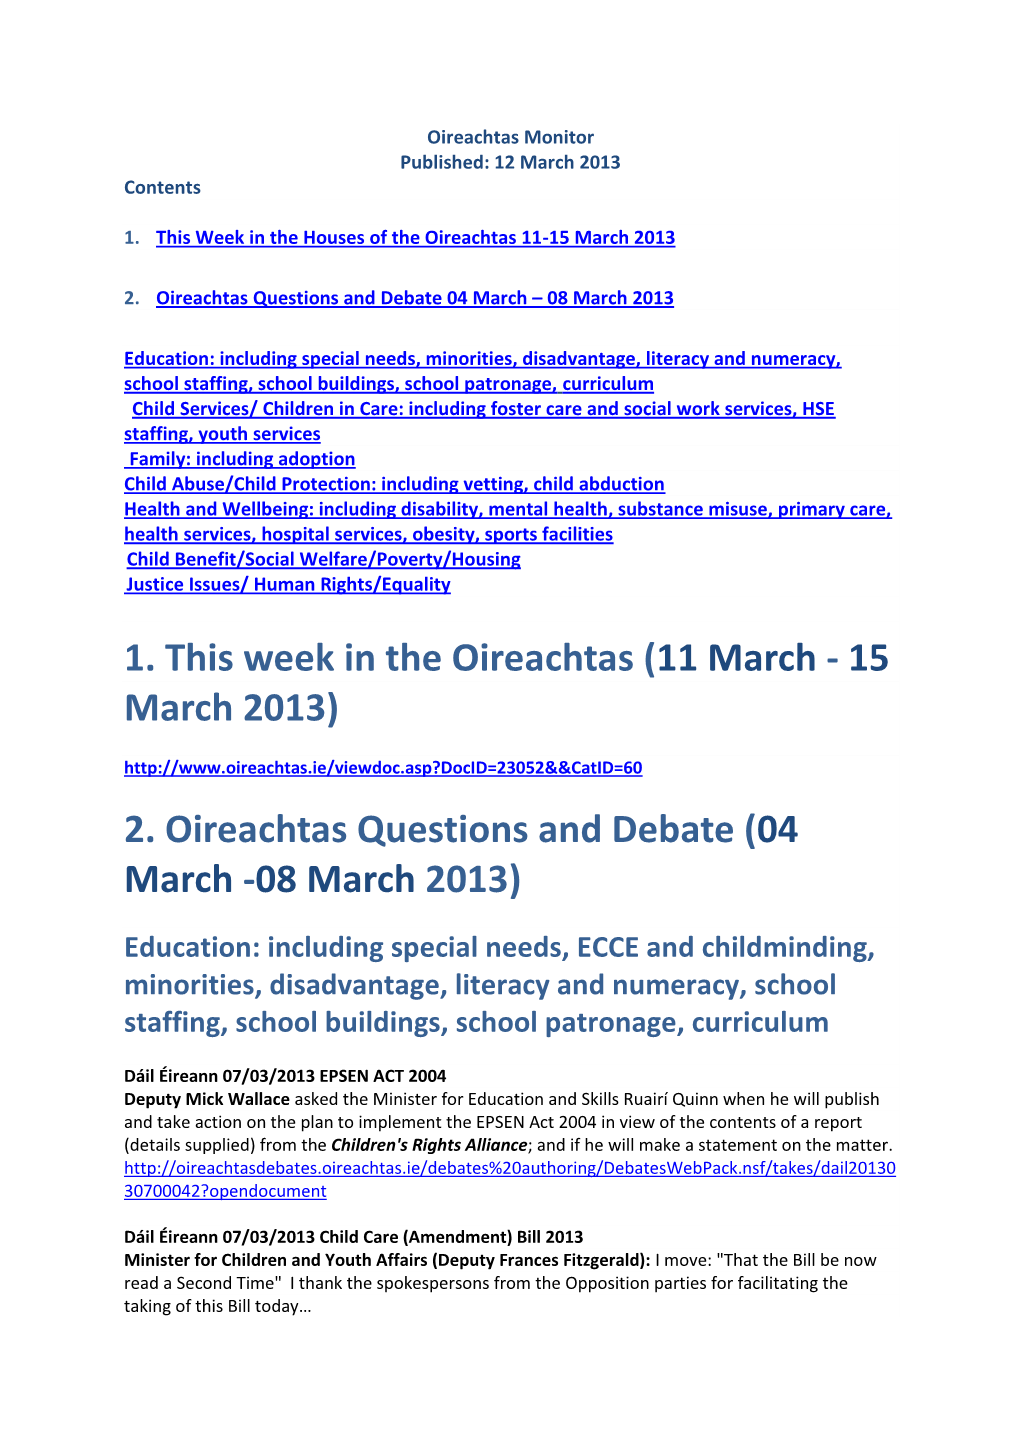 2. Oireachtas Questions and Debate (04 March -08 March 2013)